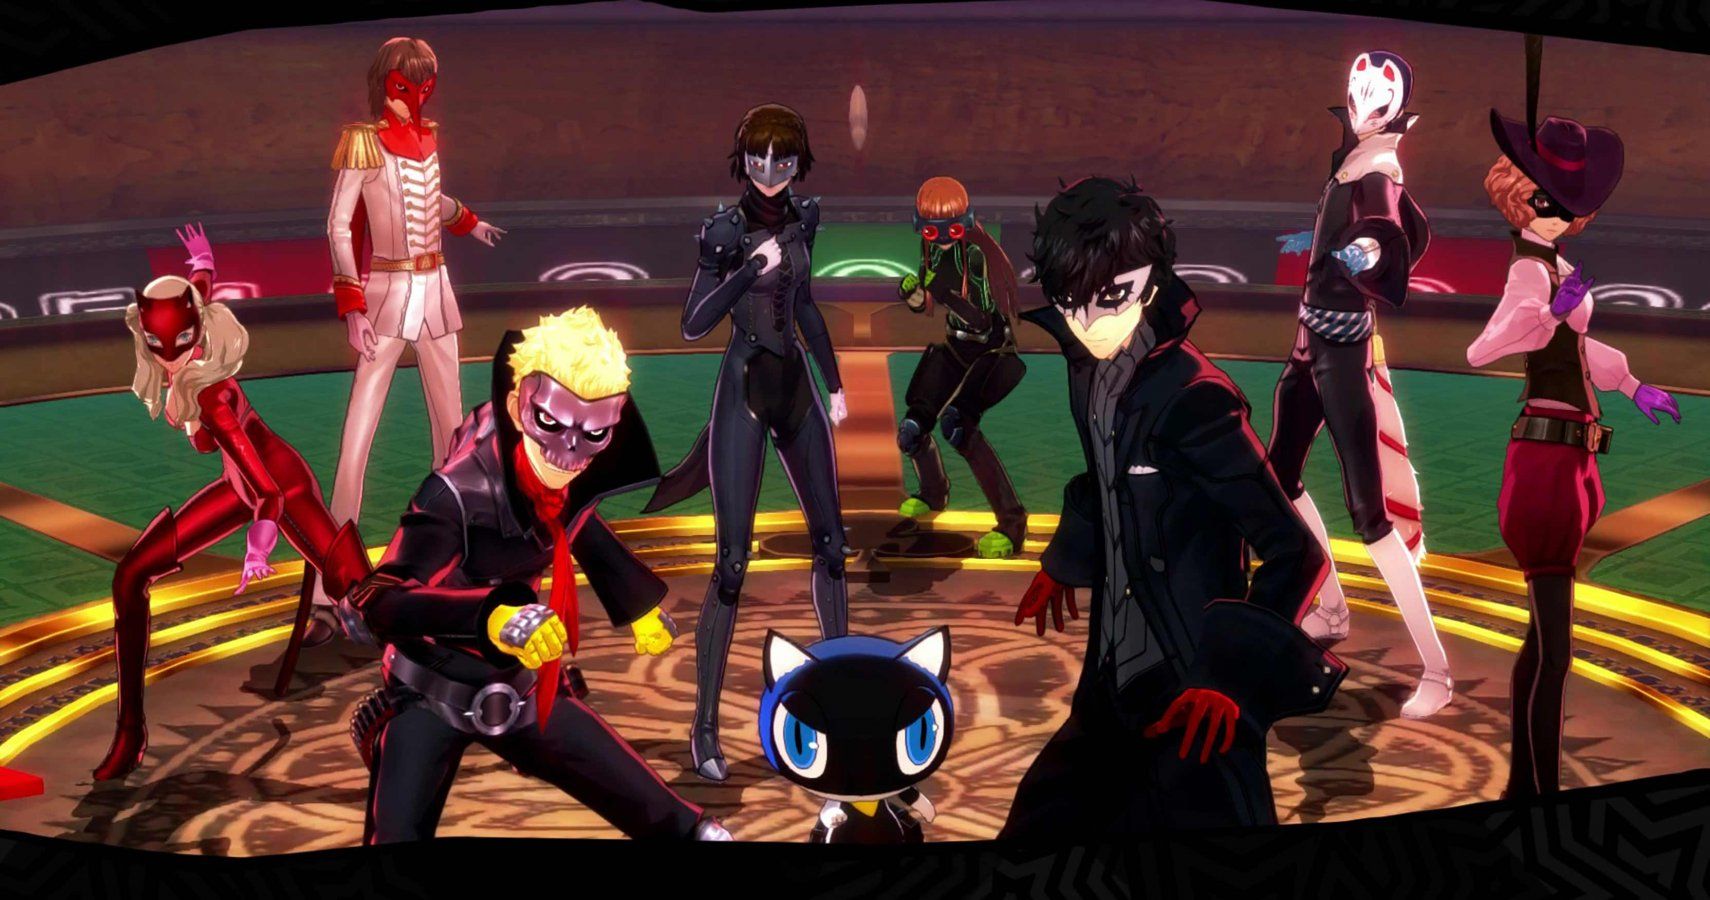 Persona 5: Every Main Character, Ranked By Intelligence